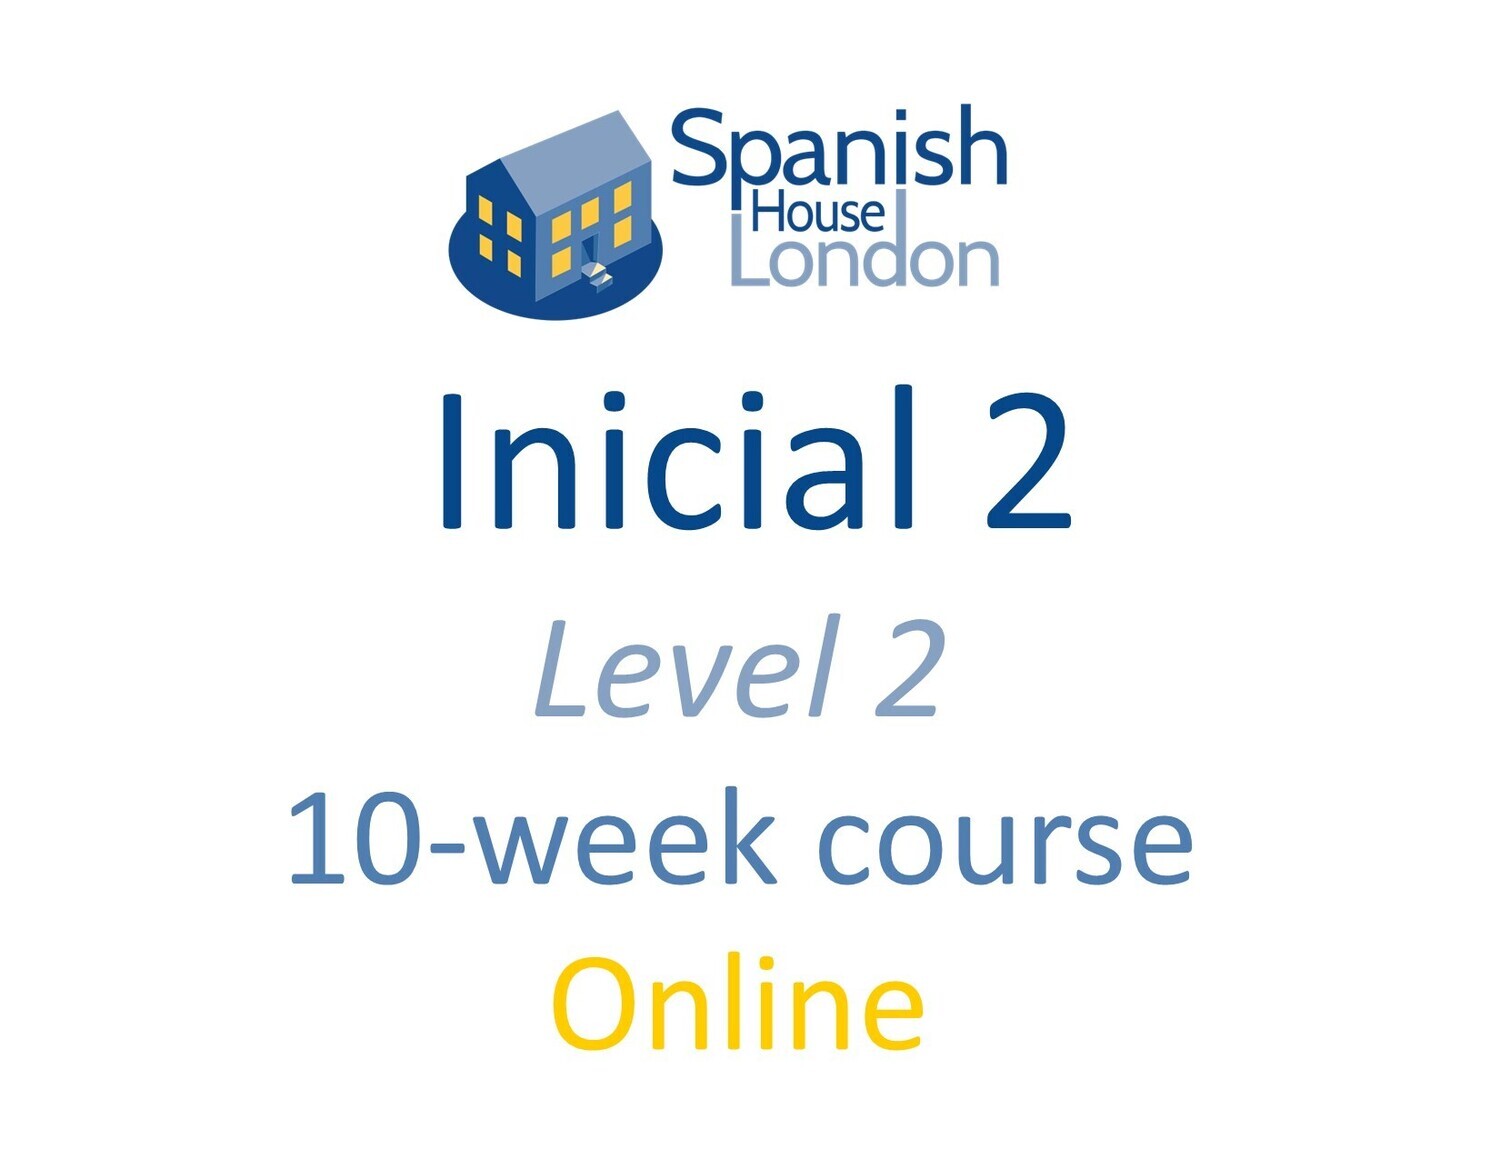 Inicial 2 Course starting on 14th March at 7.30pm Online